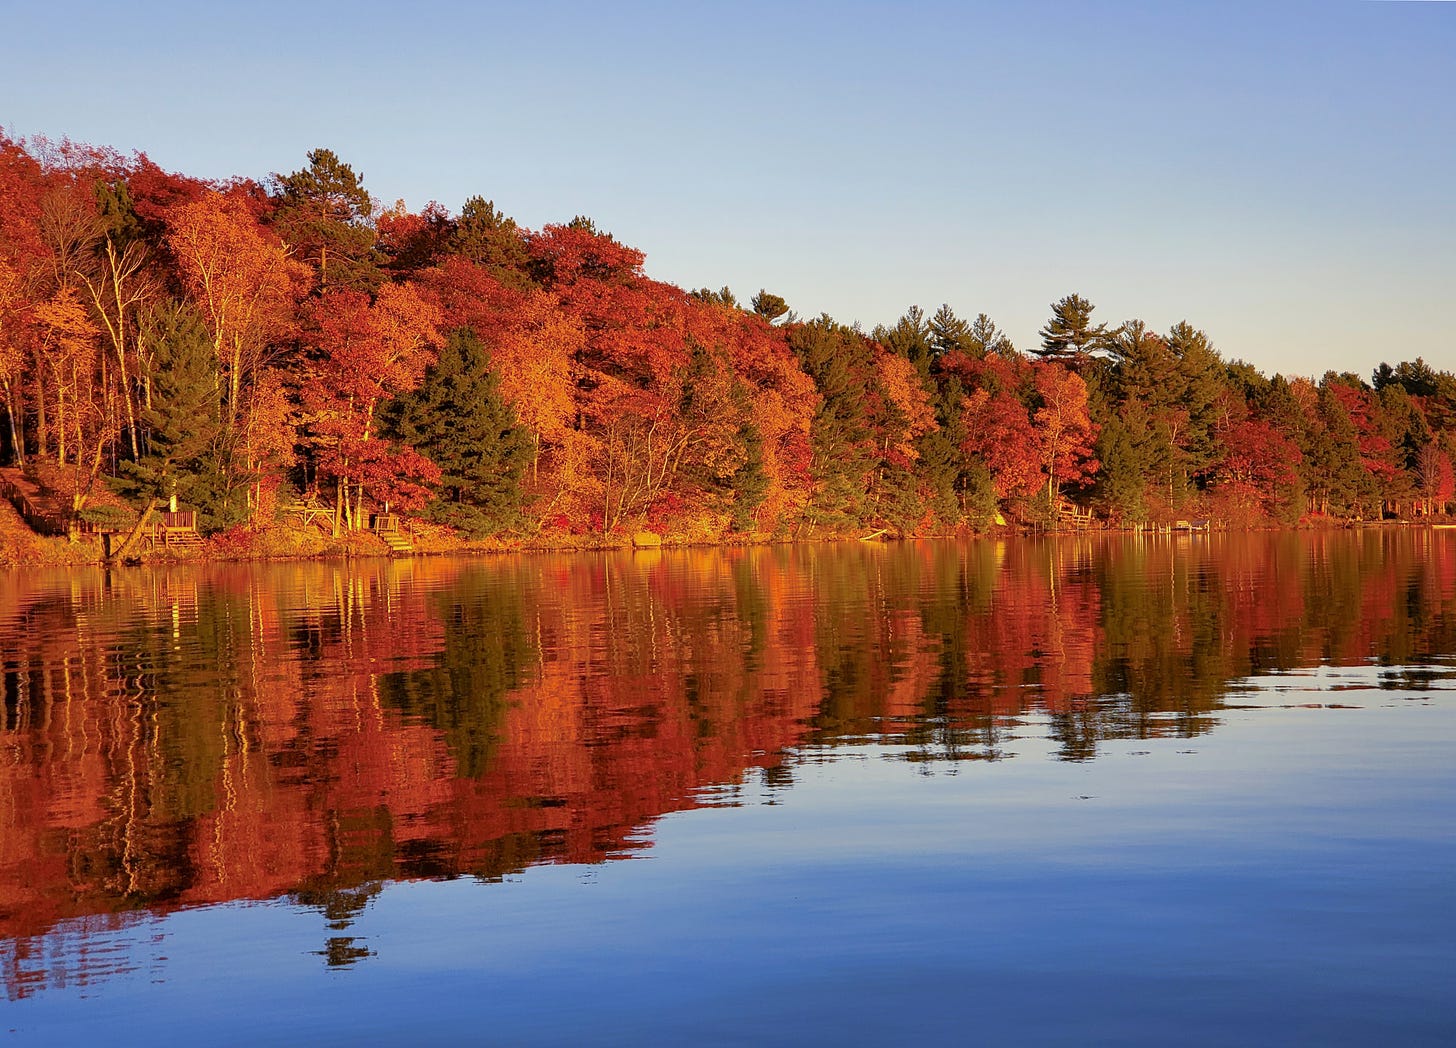 Brightly colored autumn leaves on trees line a placid lake, where the reflected reds, yellows, and greens can be seen clearly in the water, too.